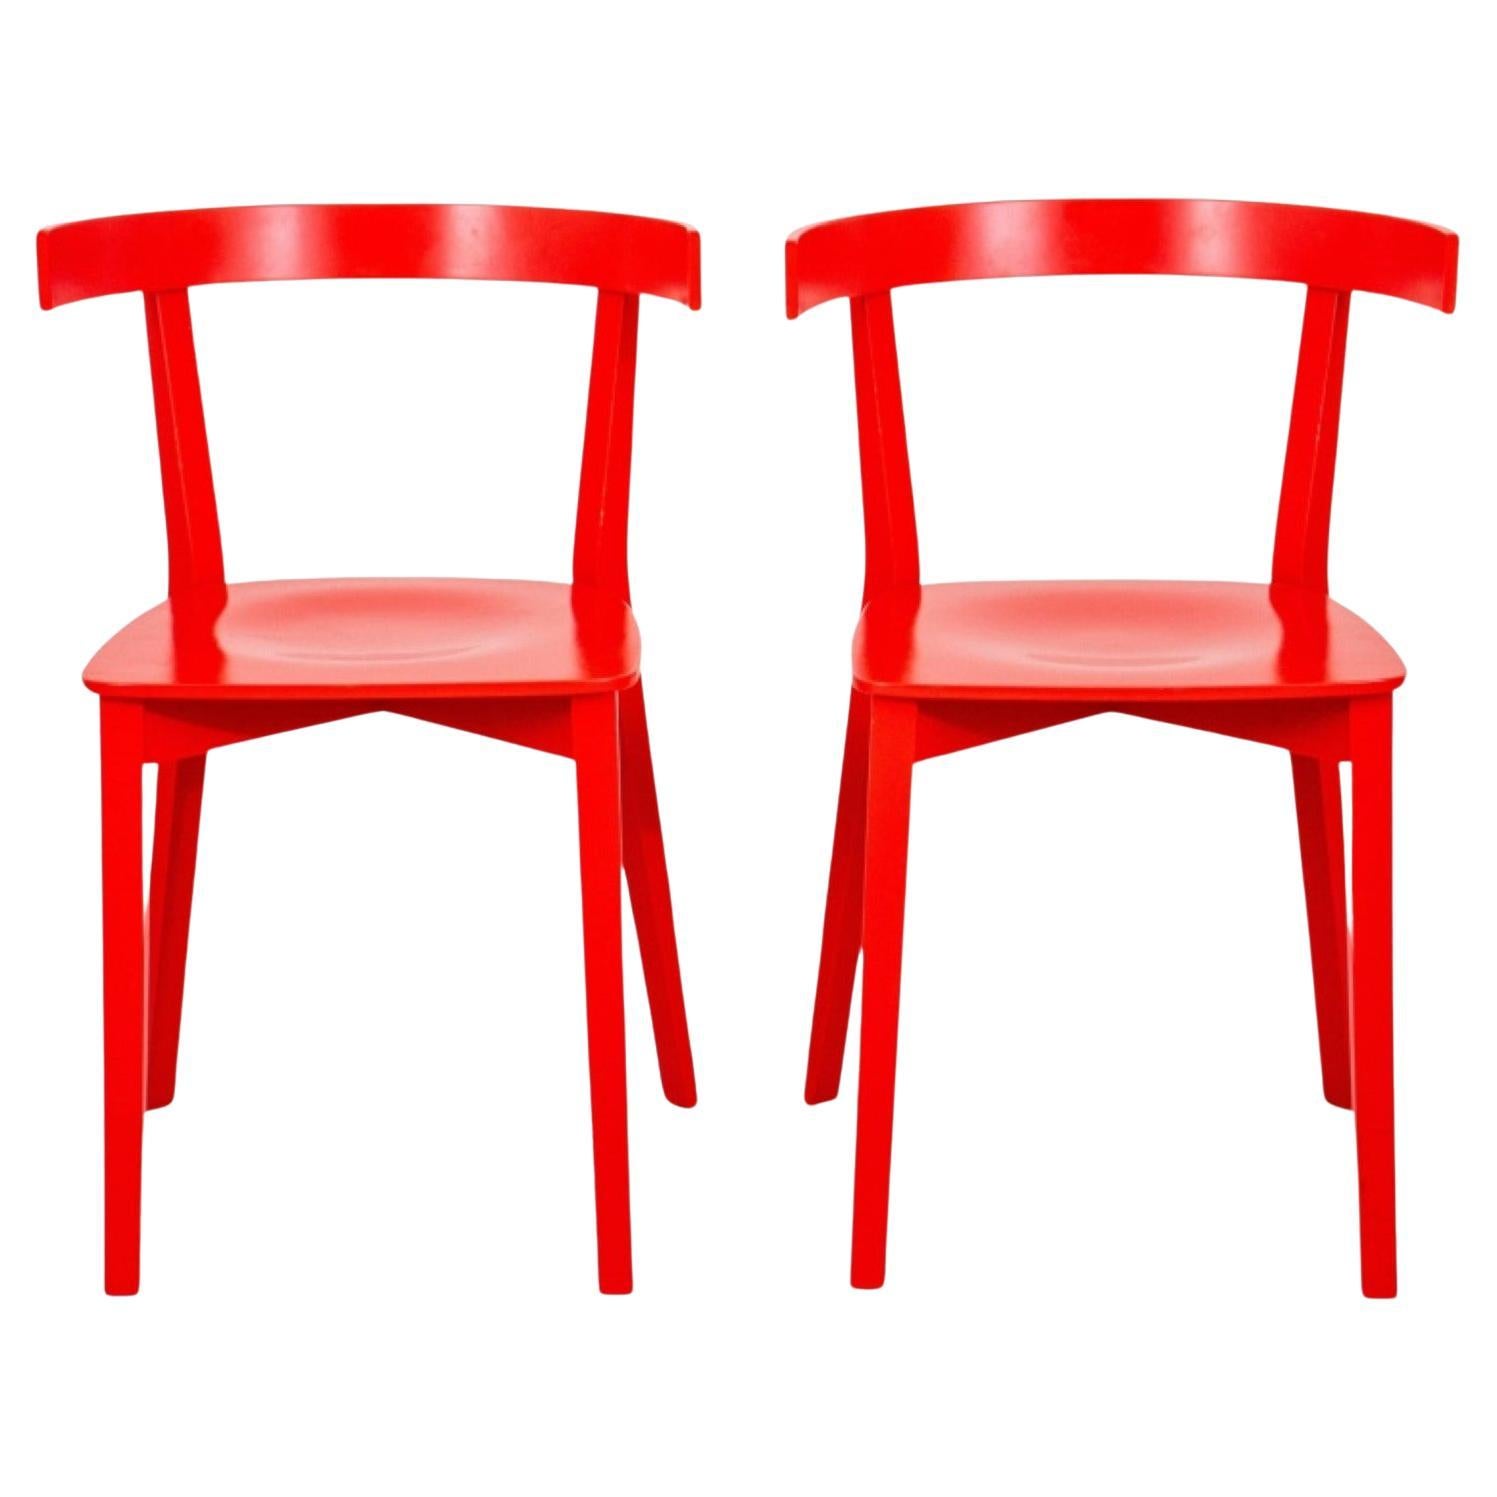 Scandinavian Modern Red Side Chairs, 2 For Sale